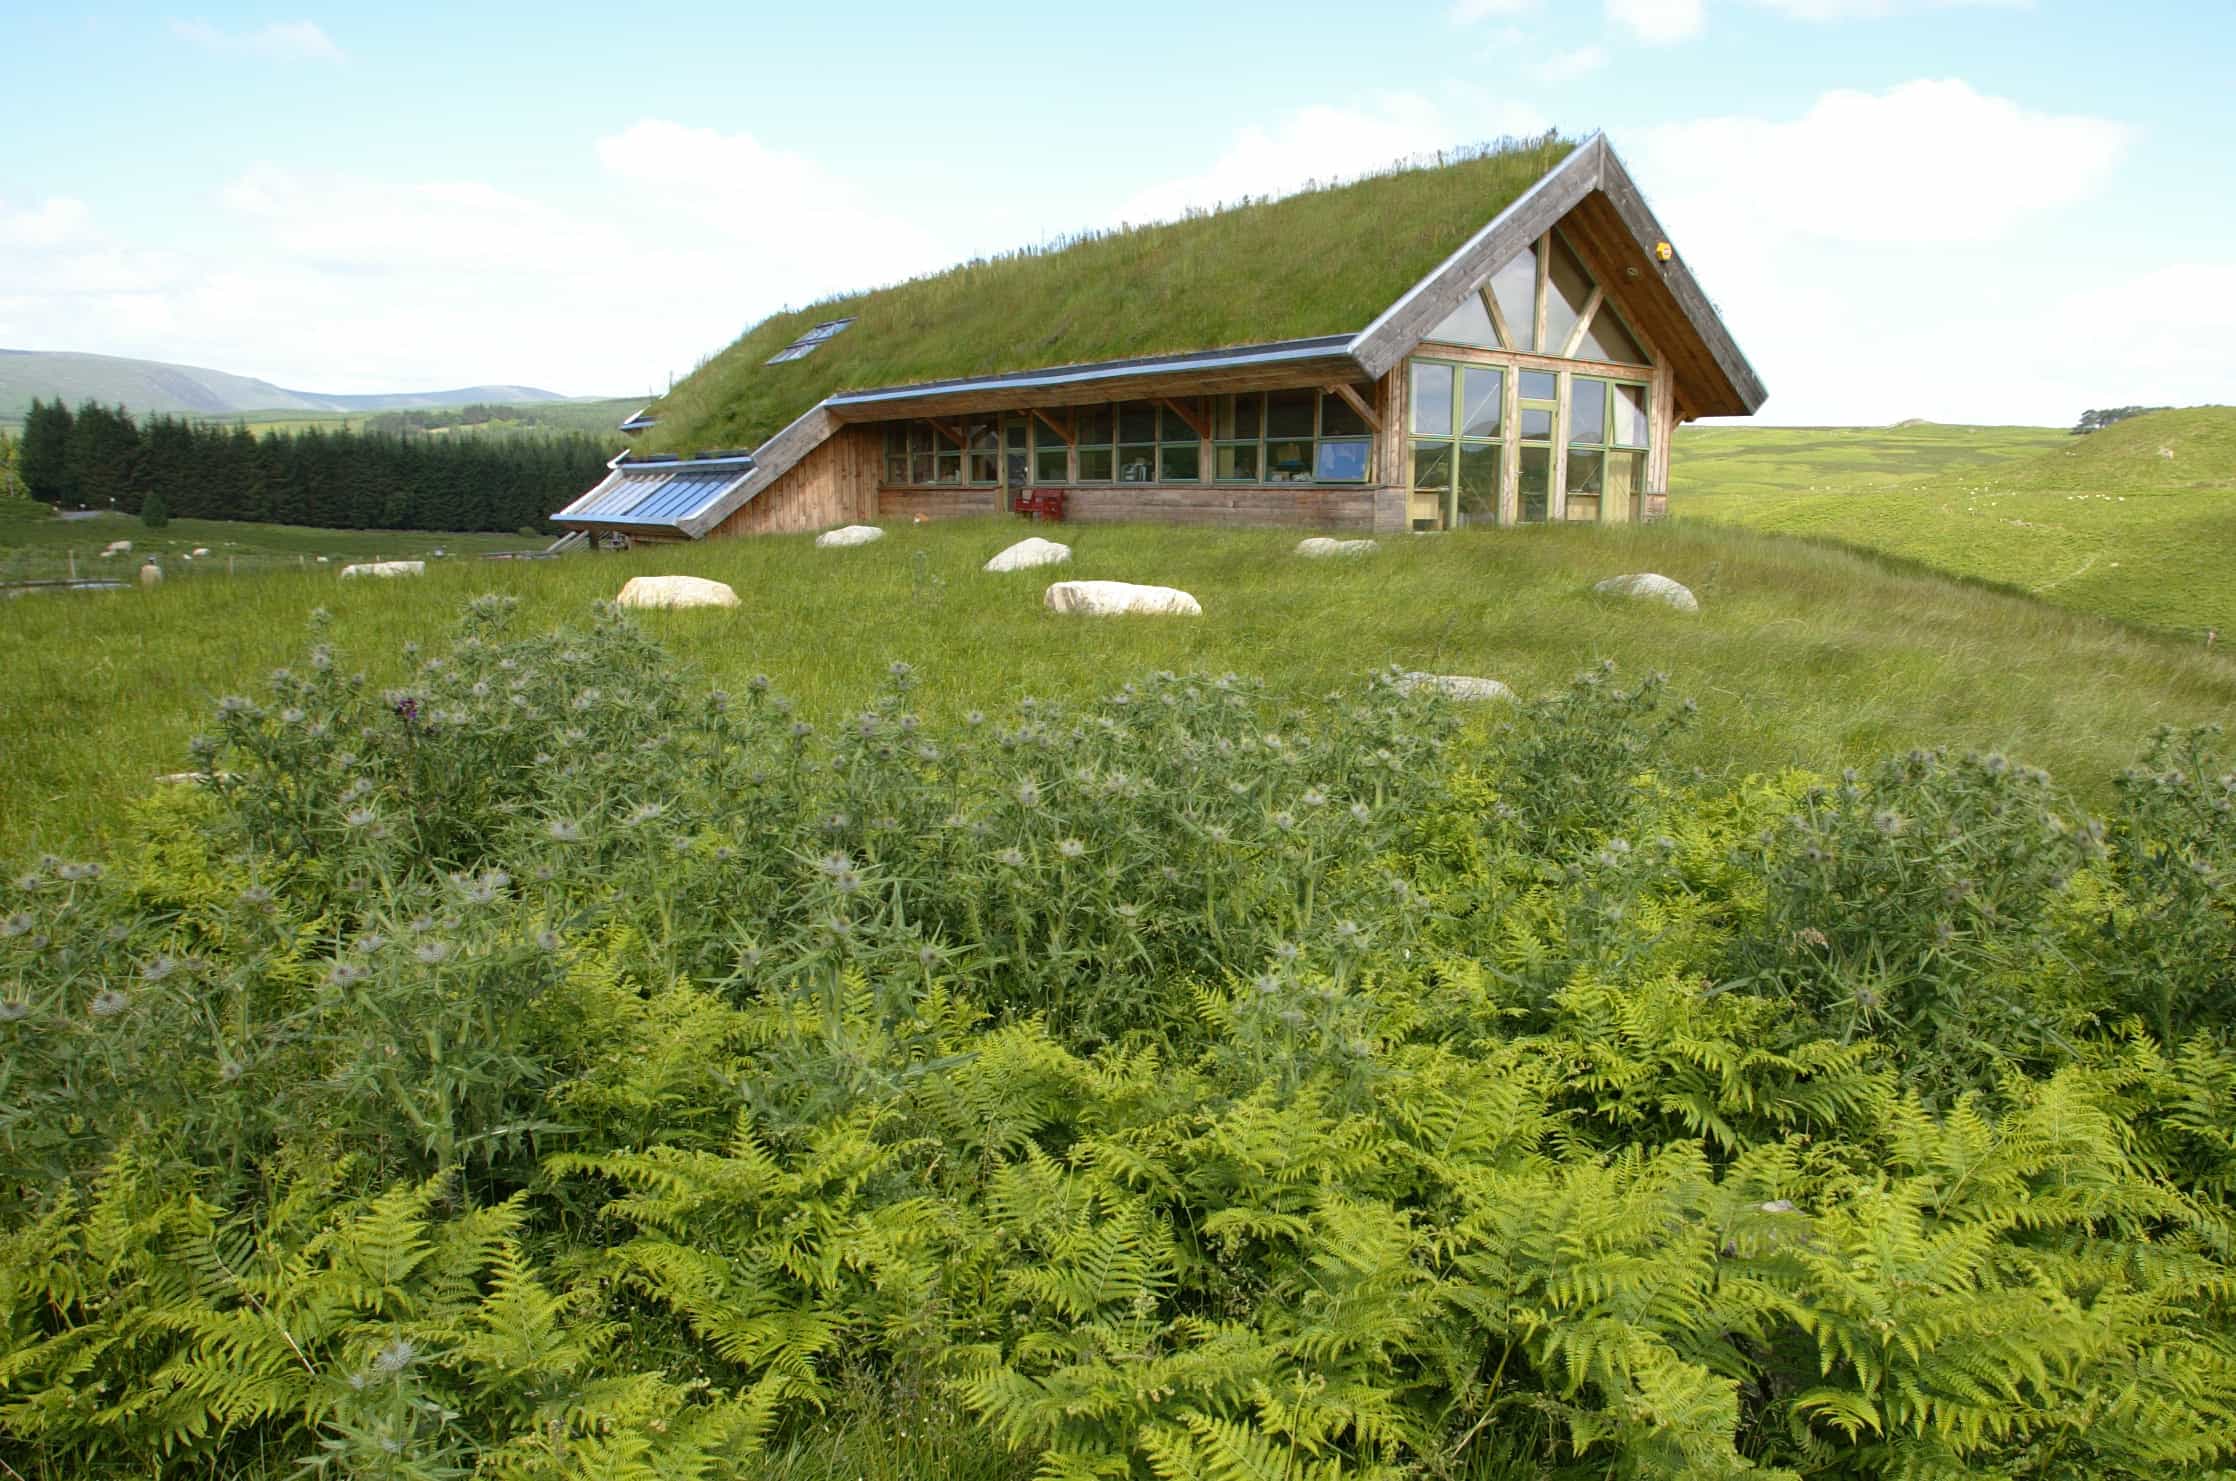 A building with a green roof and windows around it. The building is nestled on a rural setting with sheep, forests and hills.